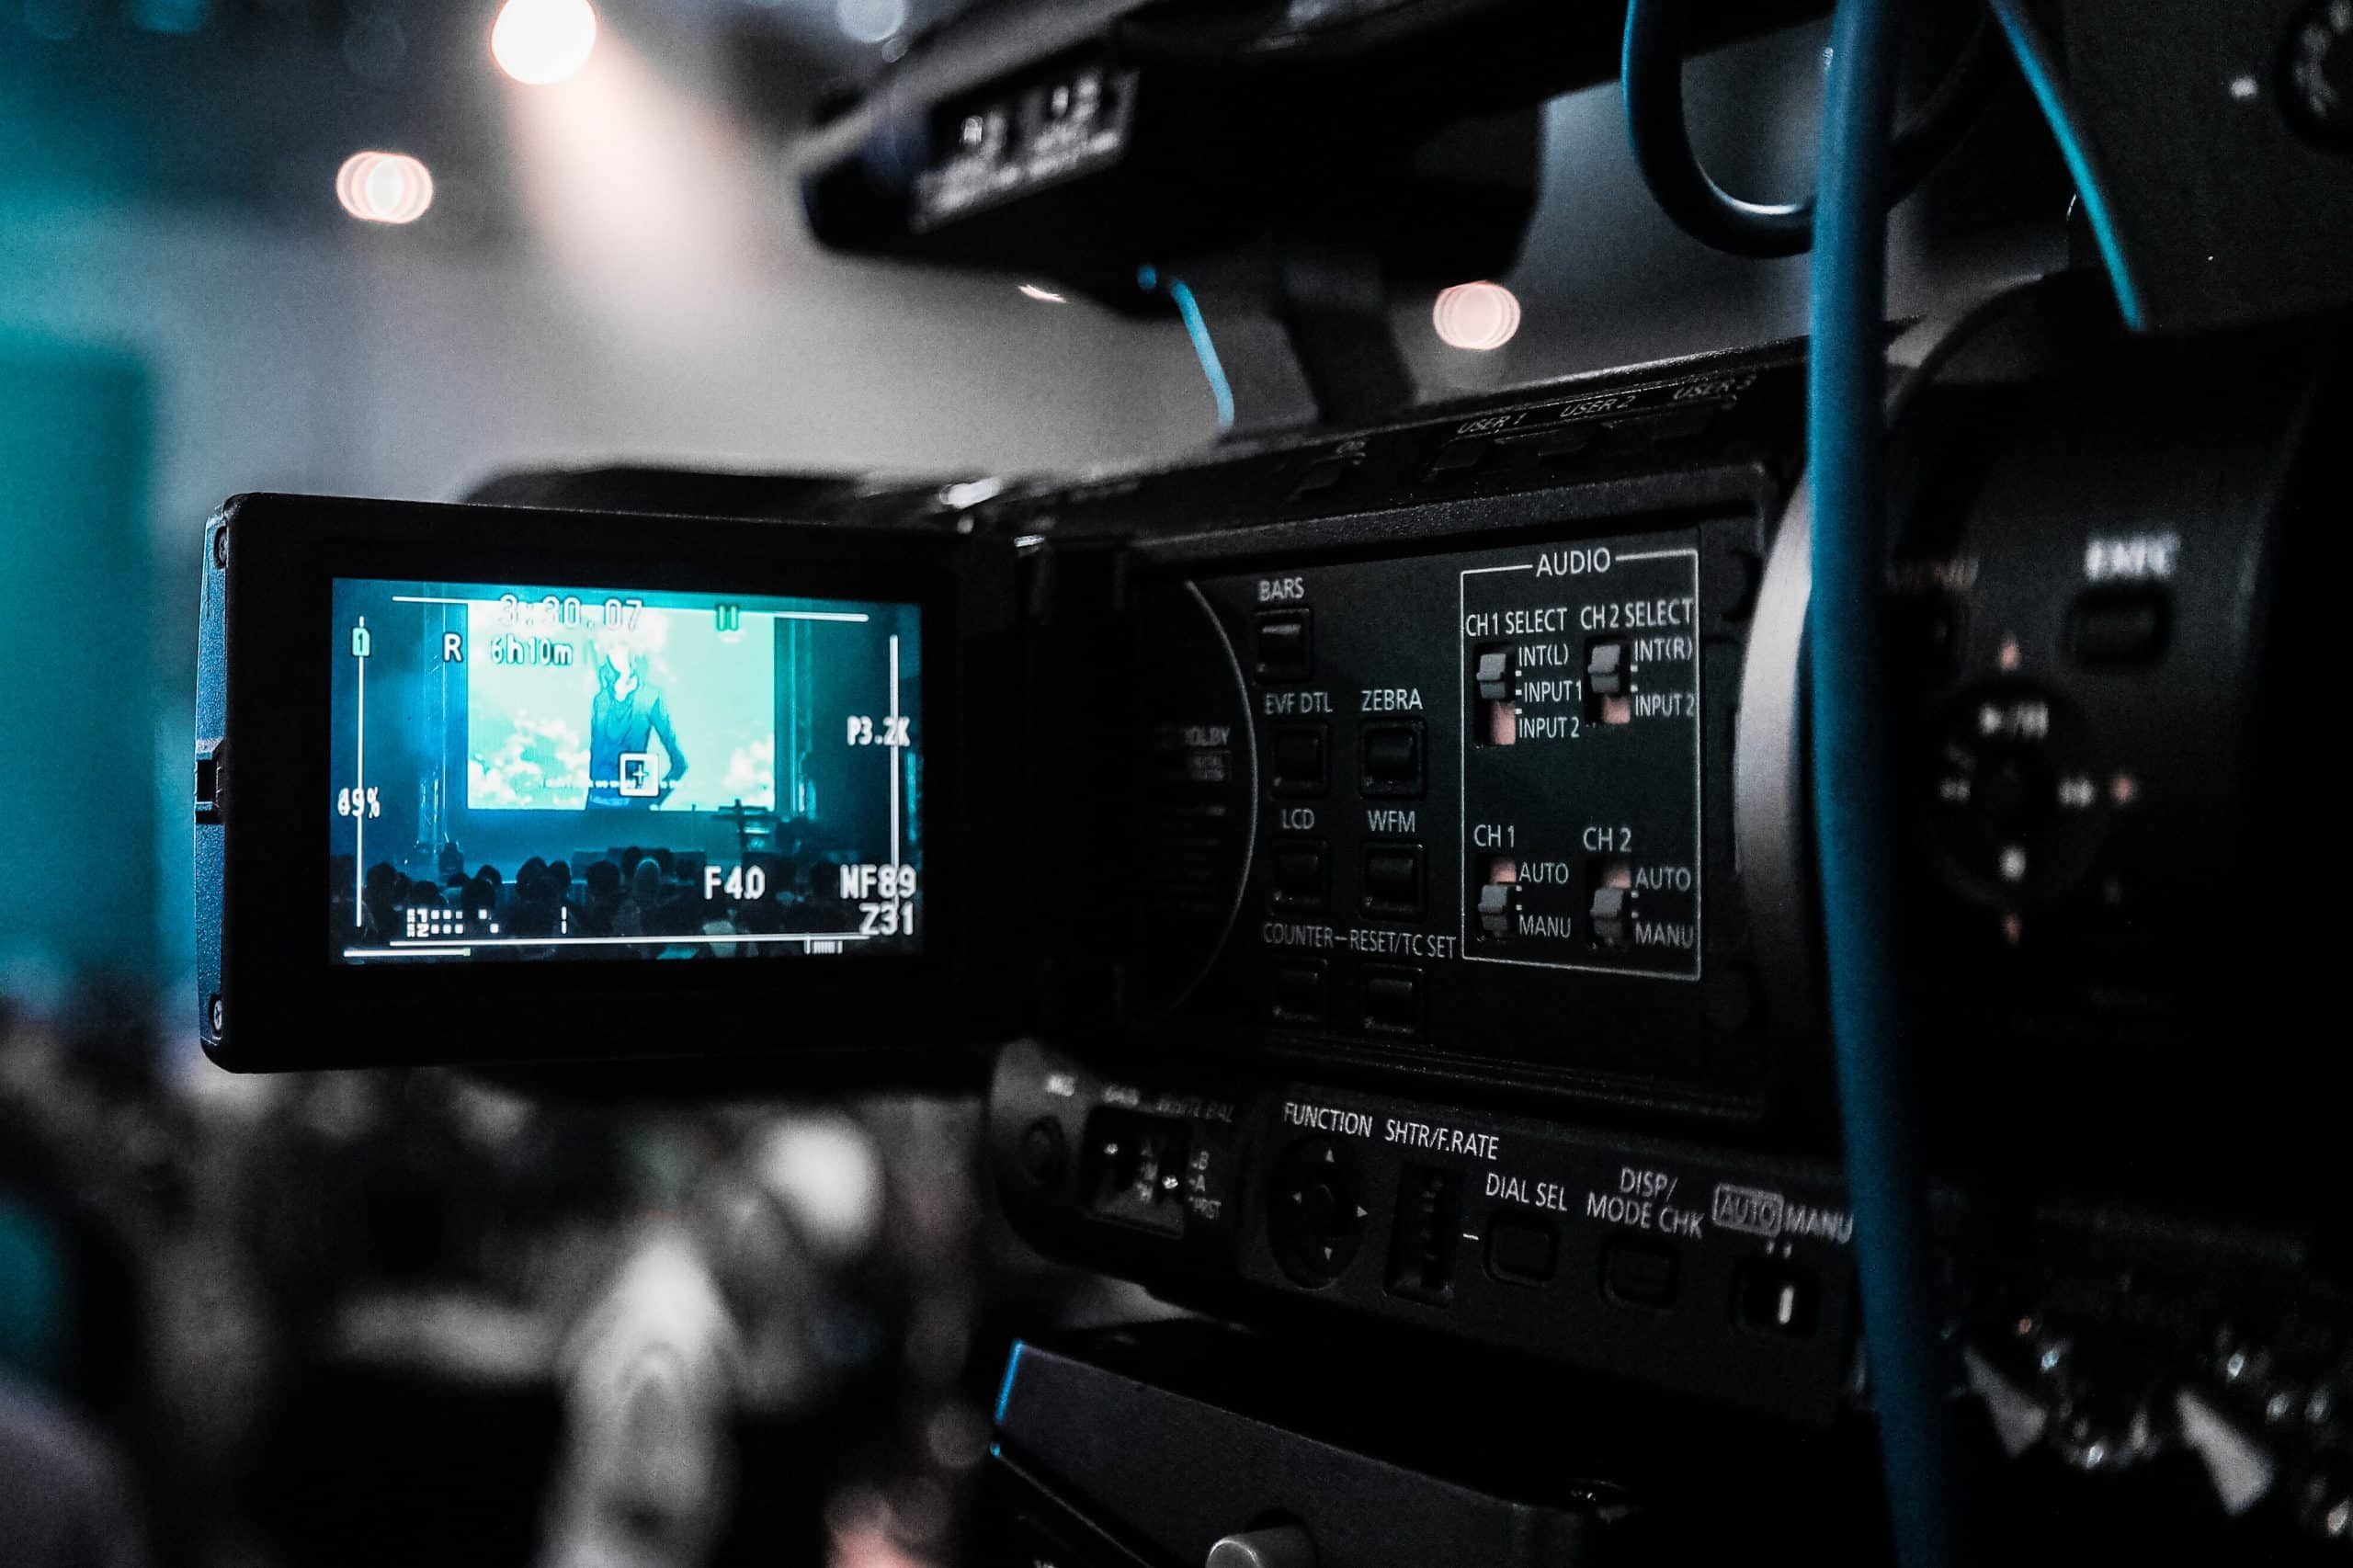 Why You Should Utilise Video Content as Part of Your PR Strategy